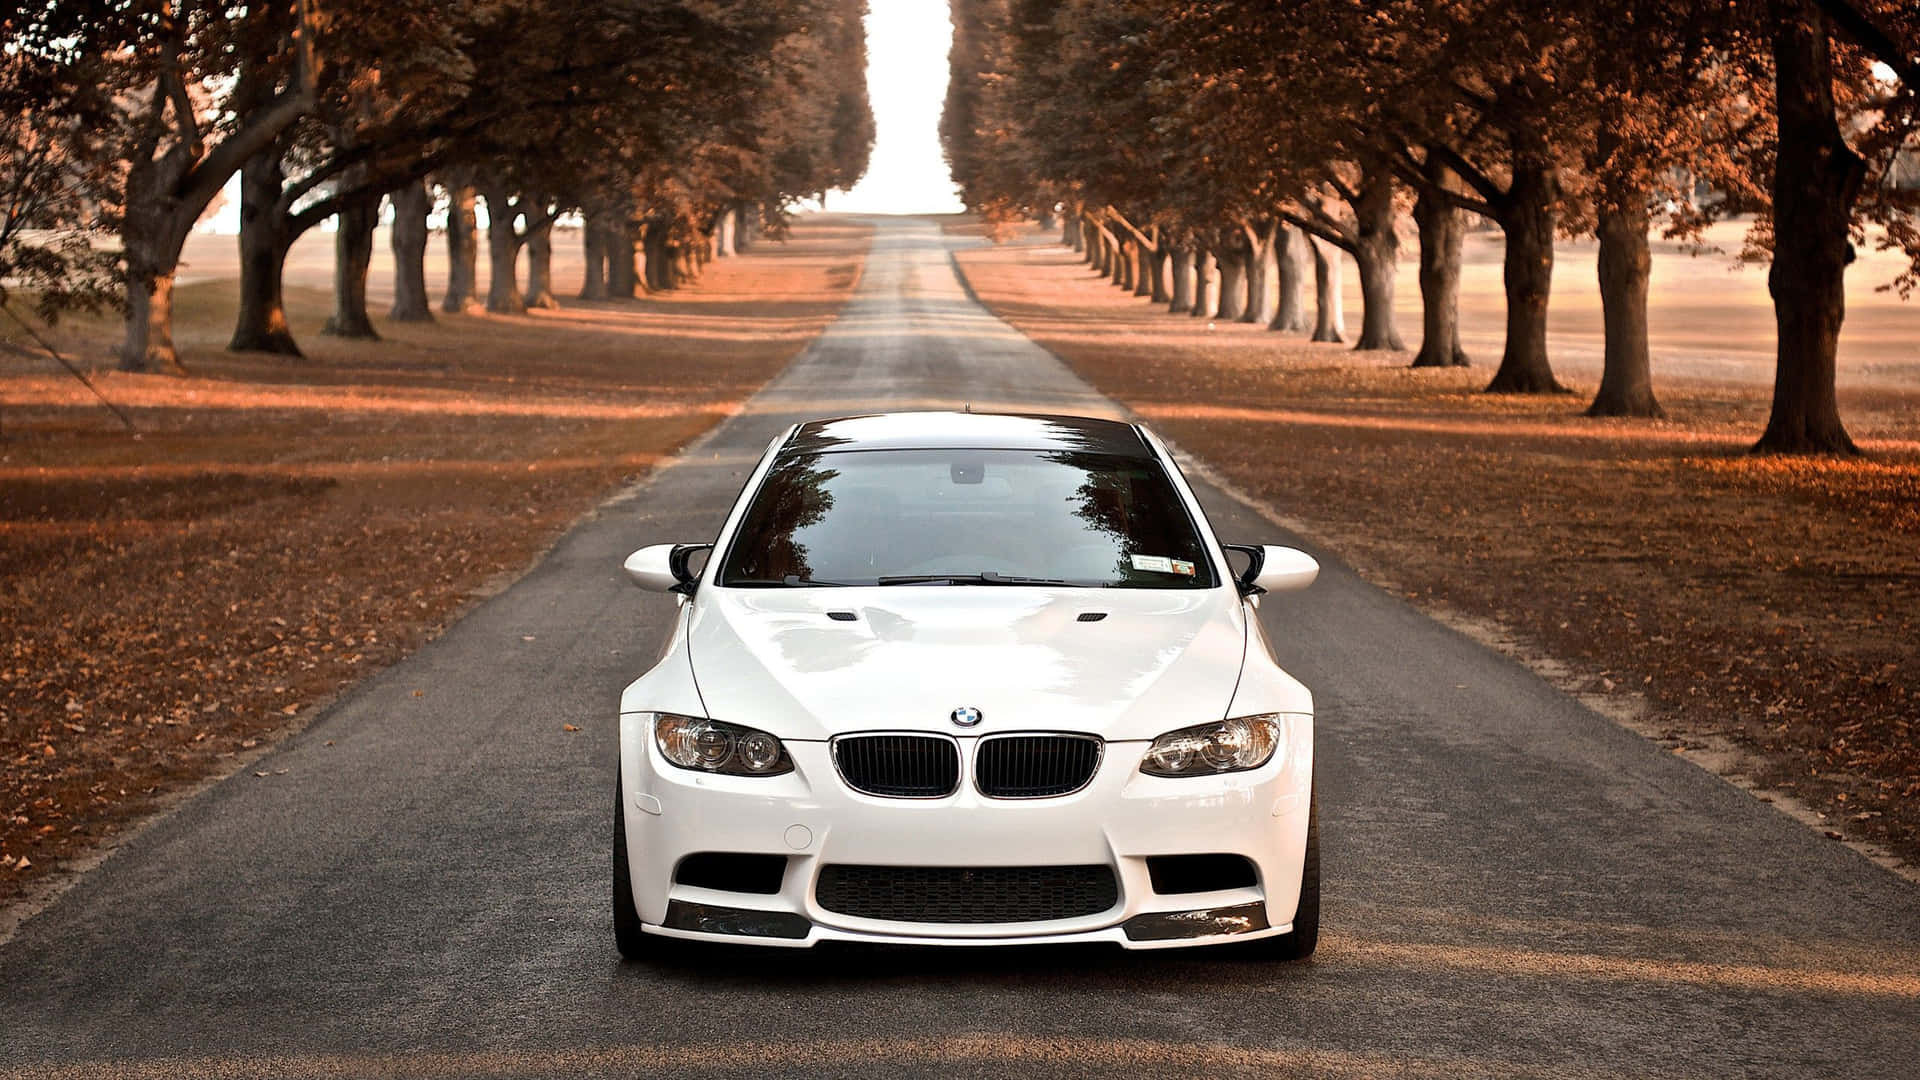 White Bmw Car On The Road